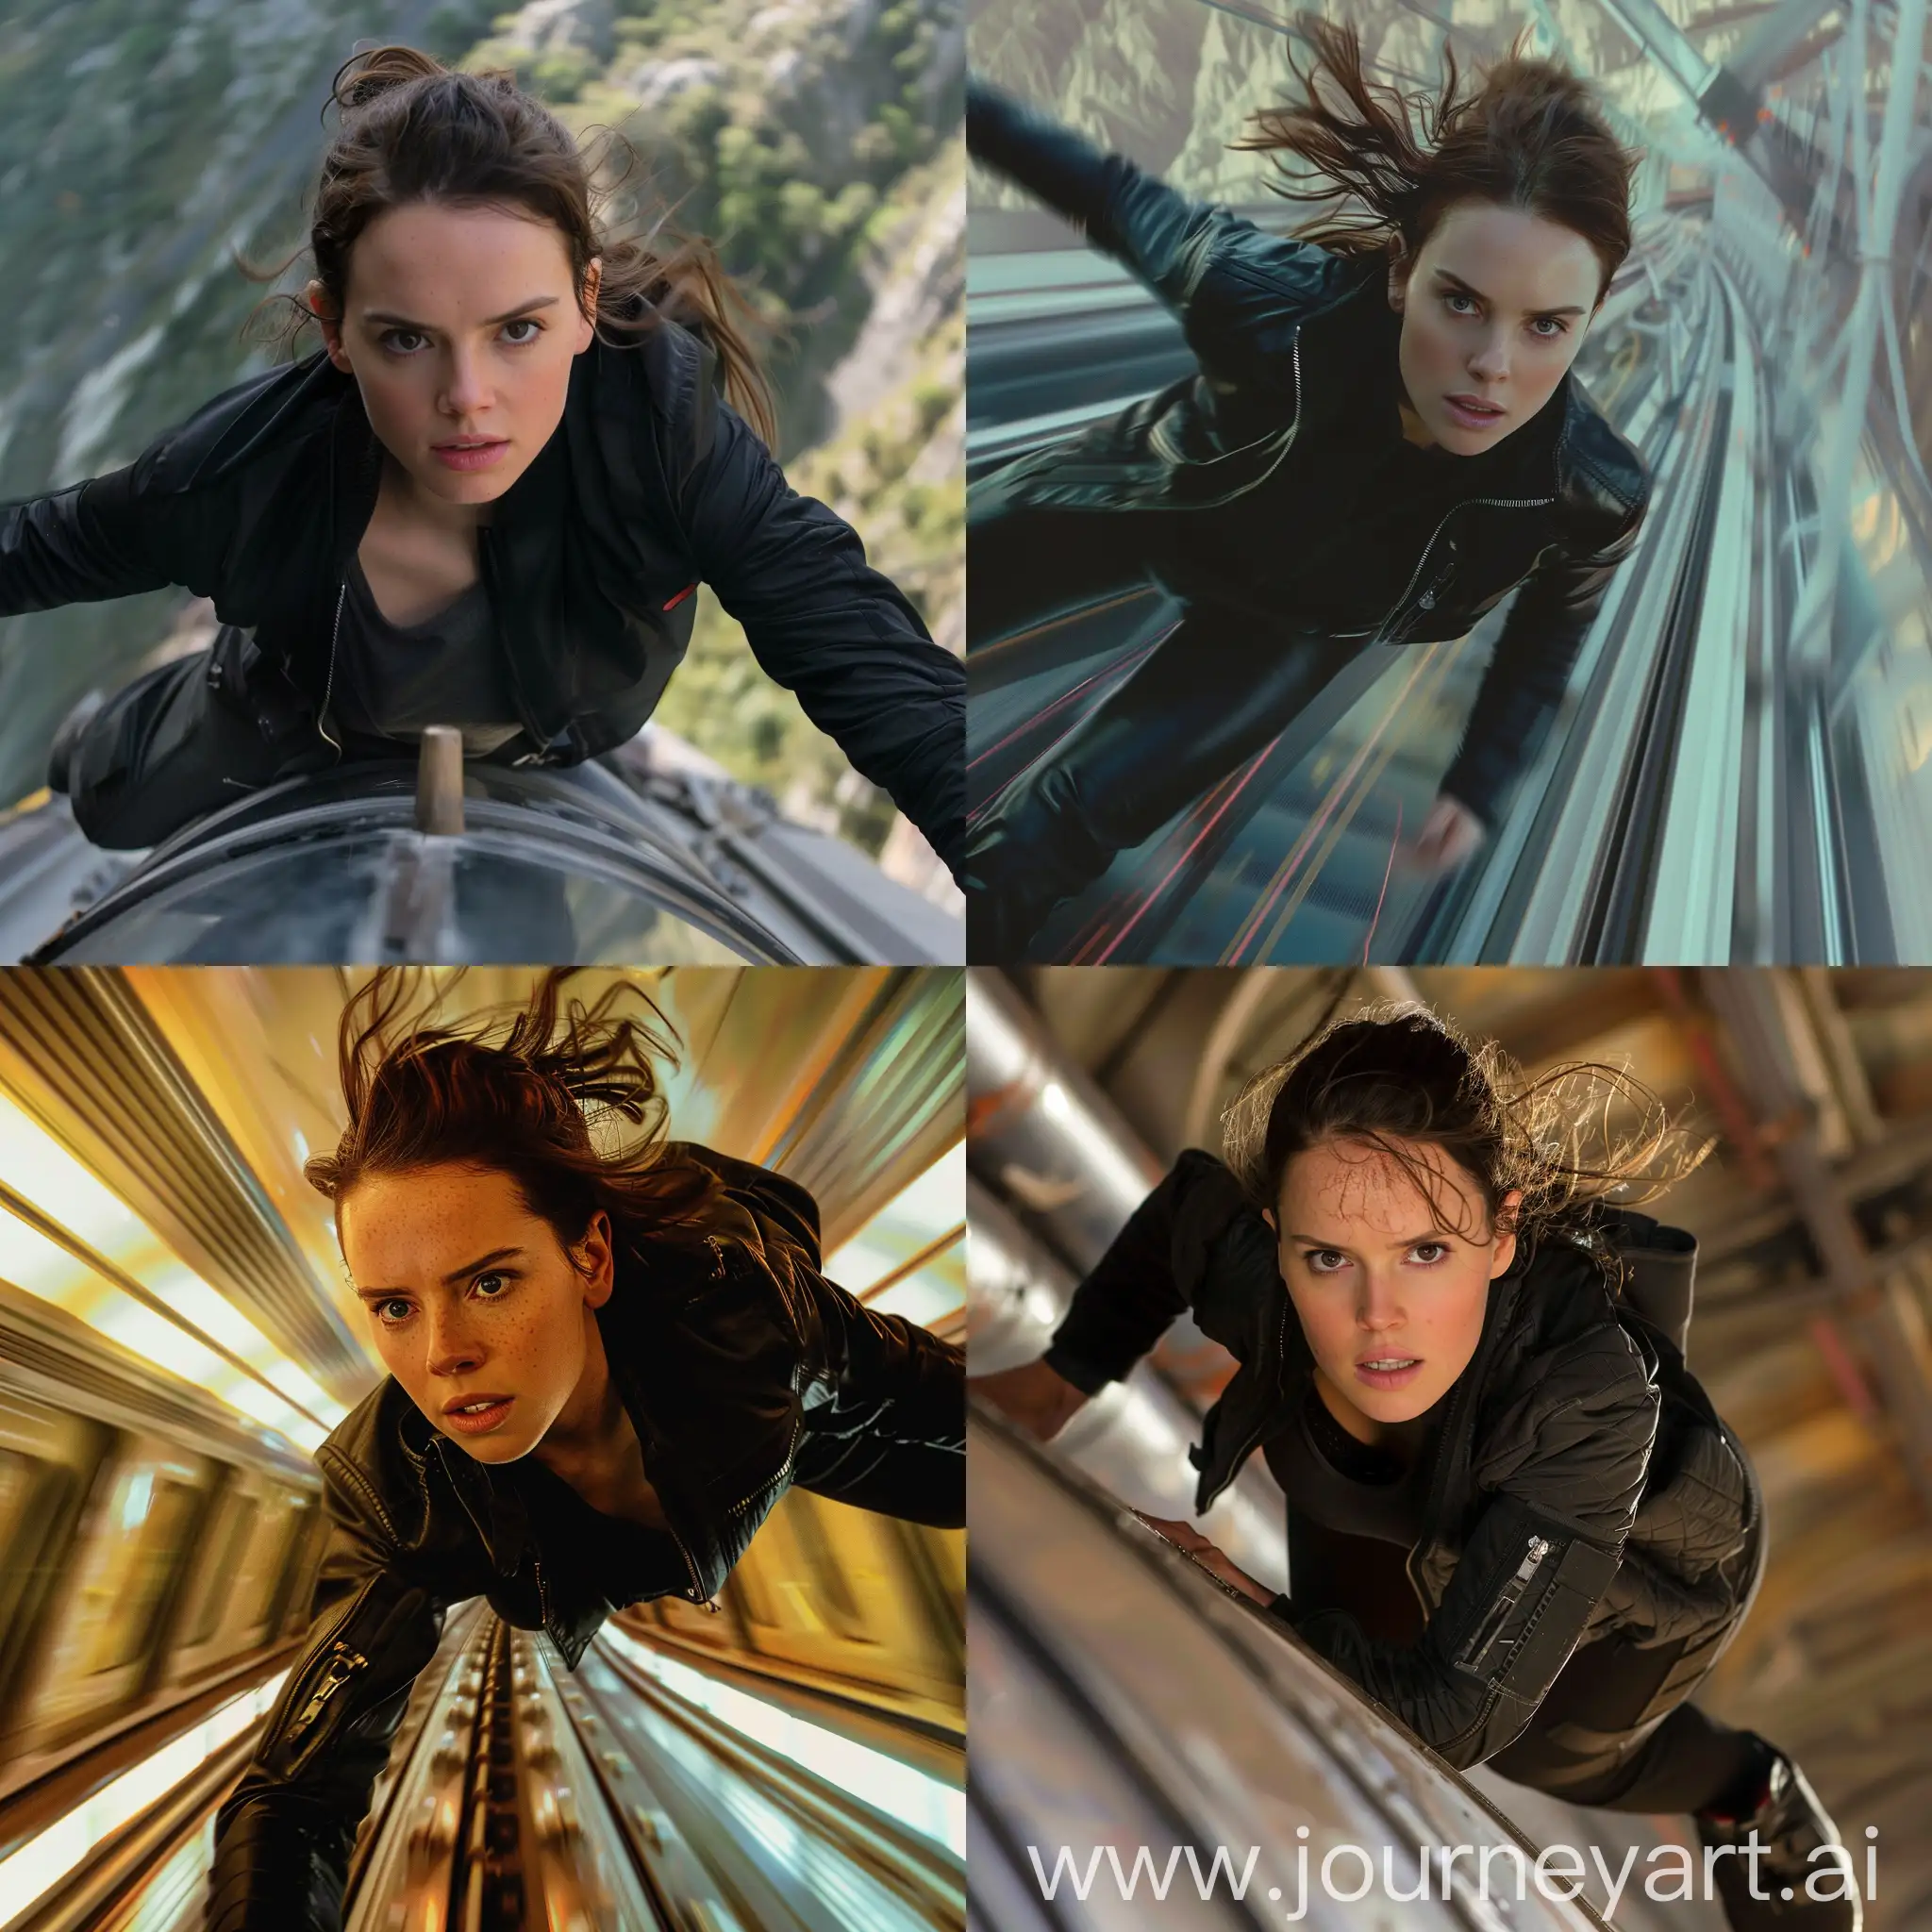 Action-Scene-Actress-Daisy-Ridley-in-Mission-Impossible-on-a-Speeding-Train